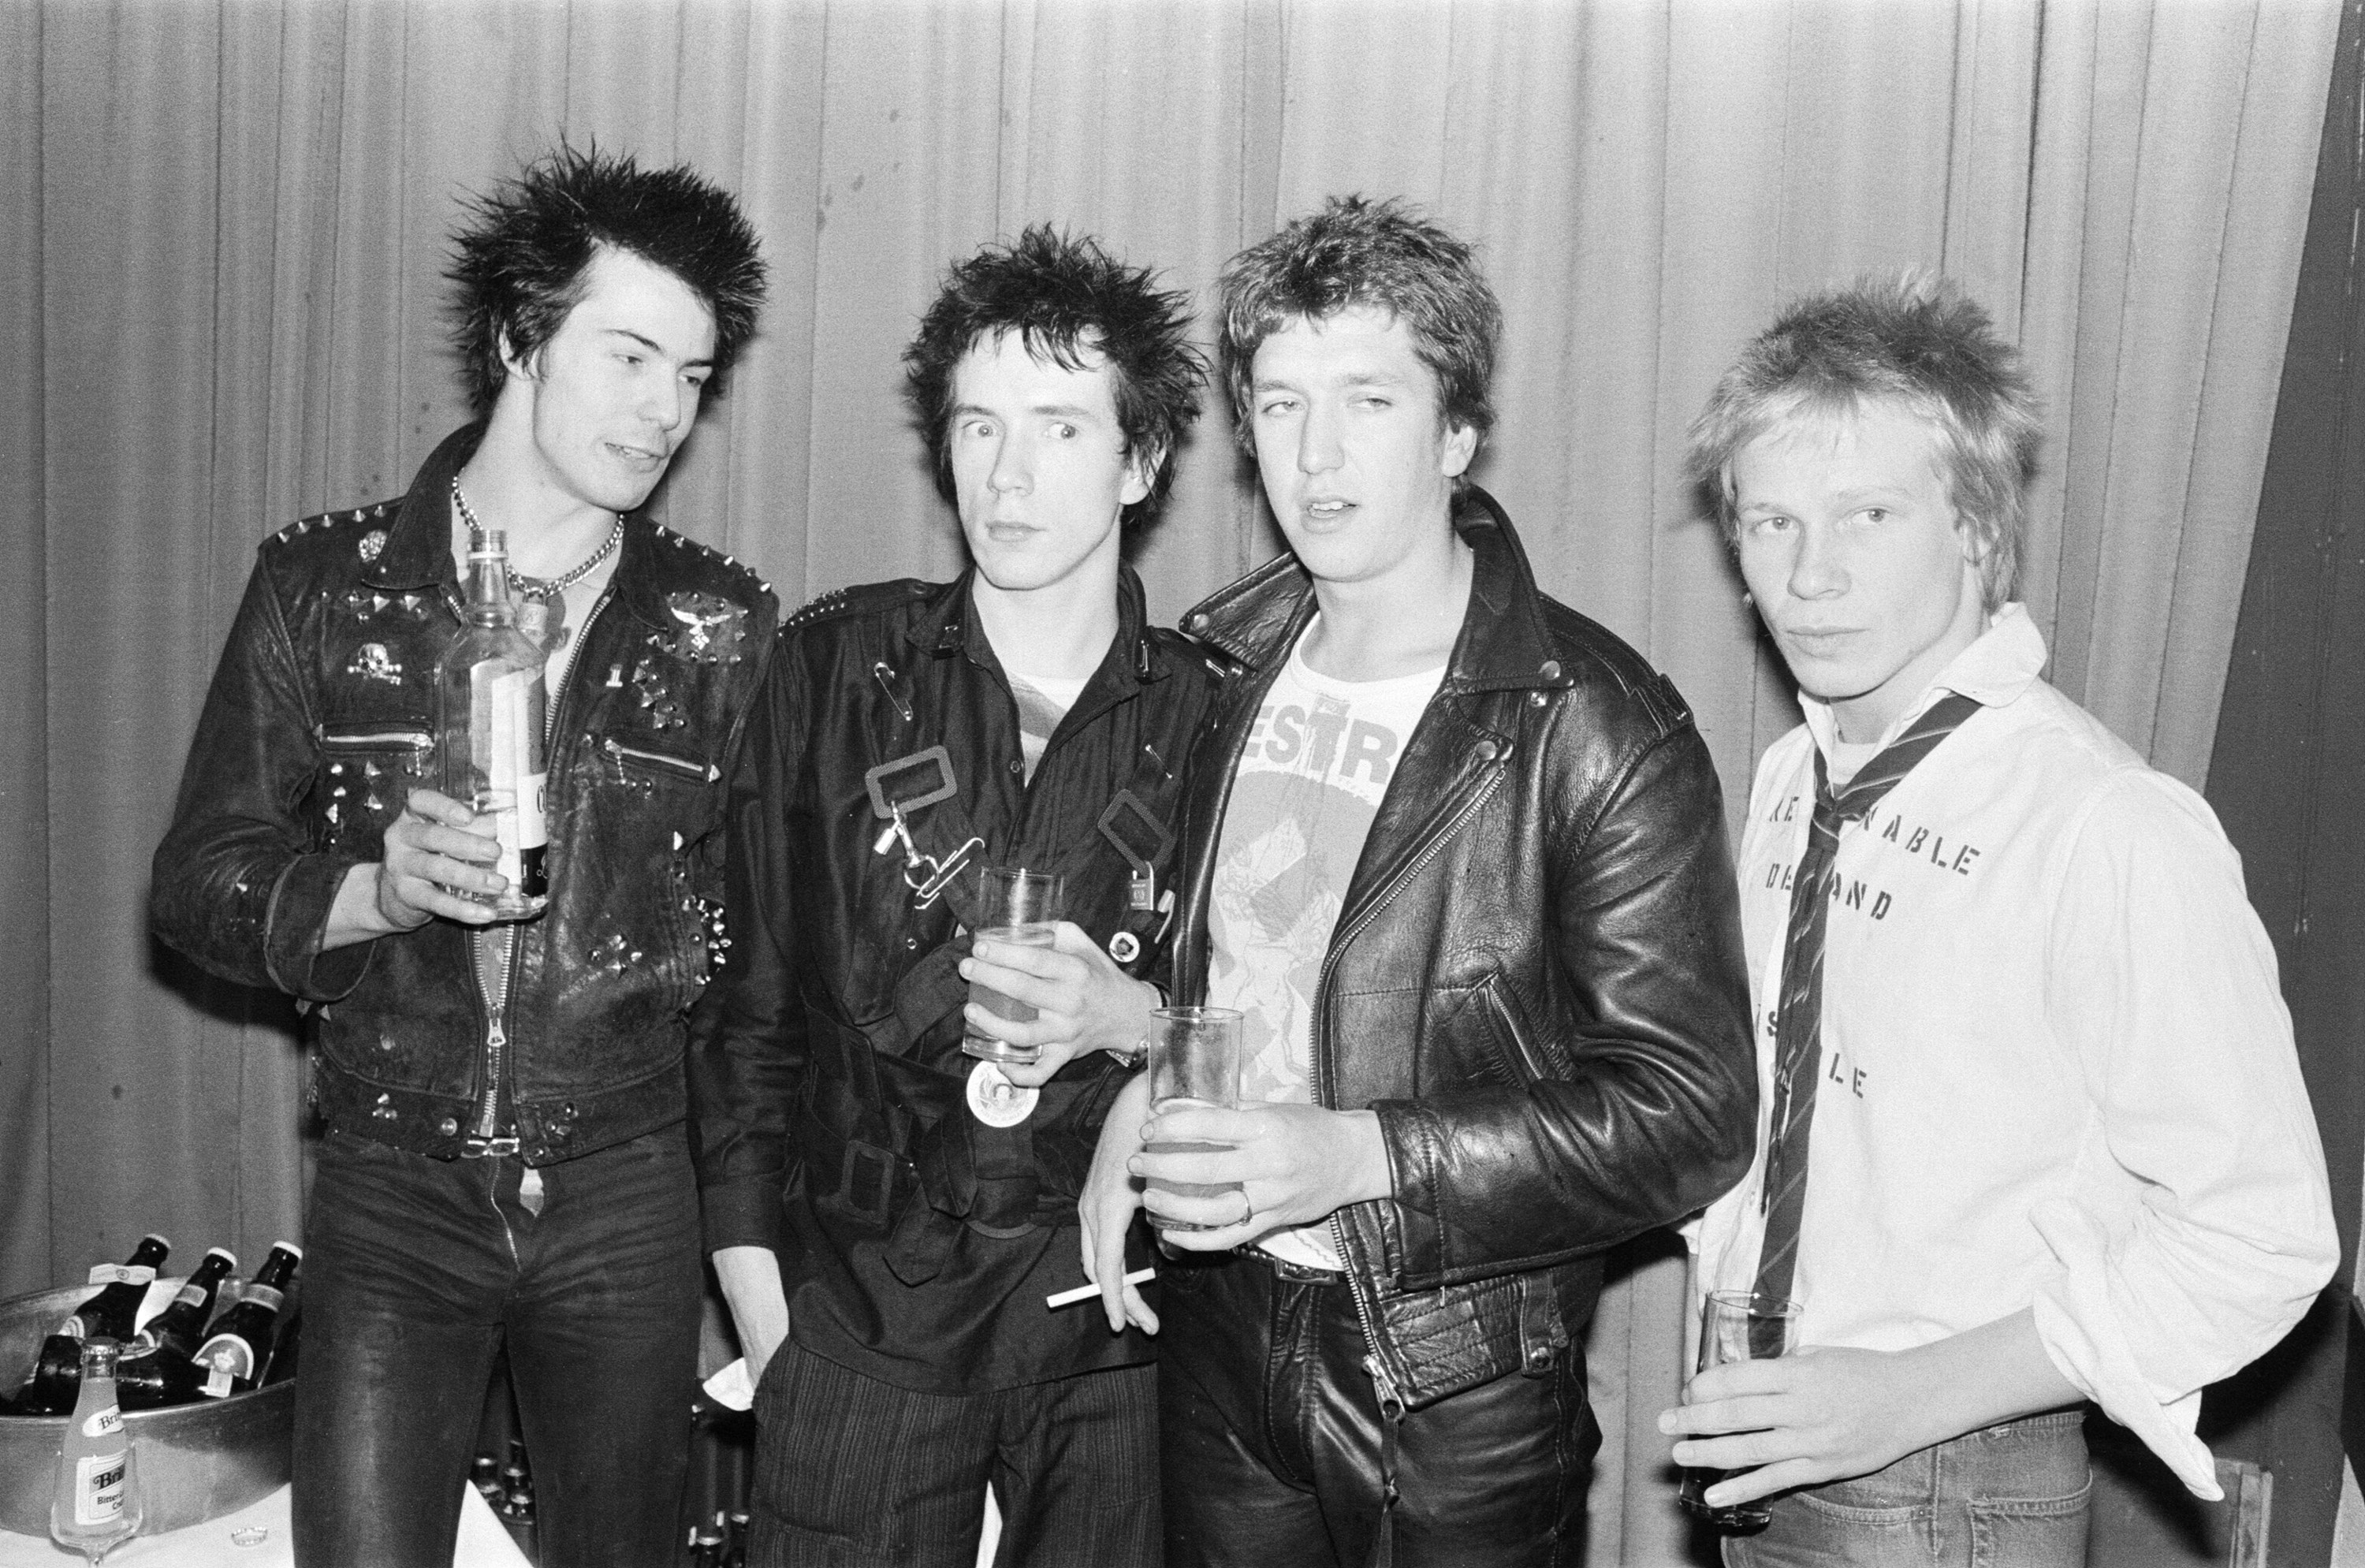 Sid Vicious and the members of the Sex Pistols stand in line in a black-and-white candid photo